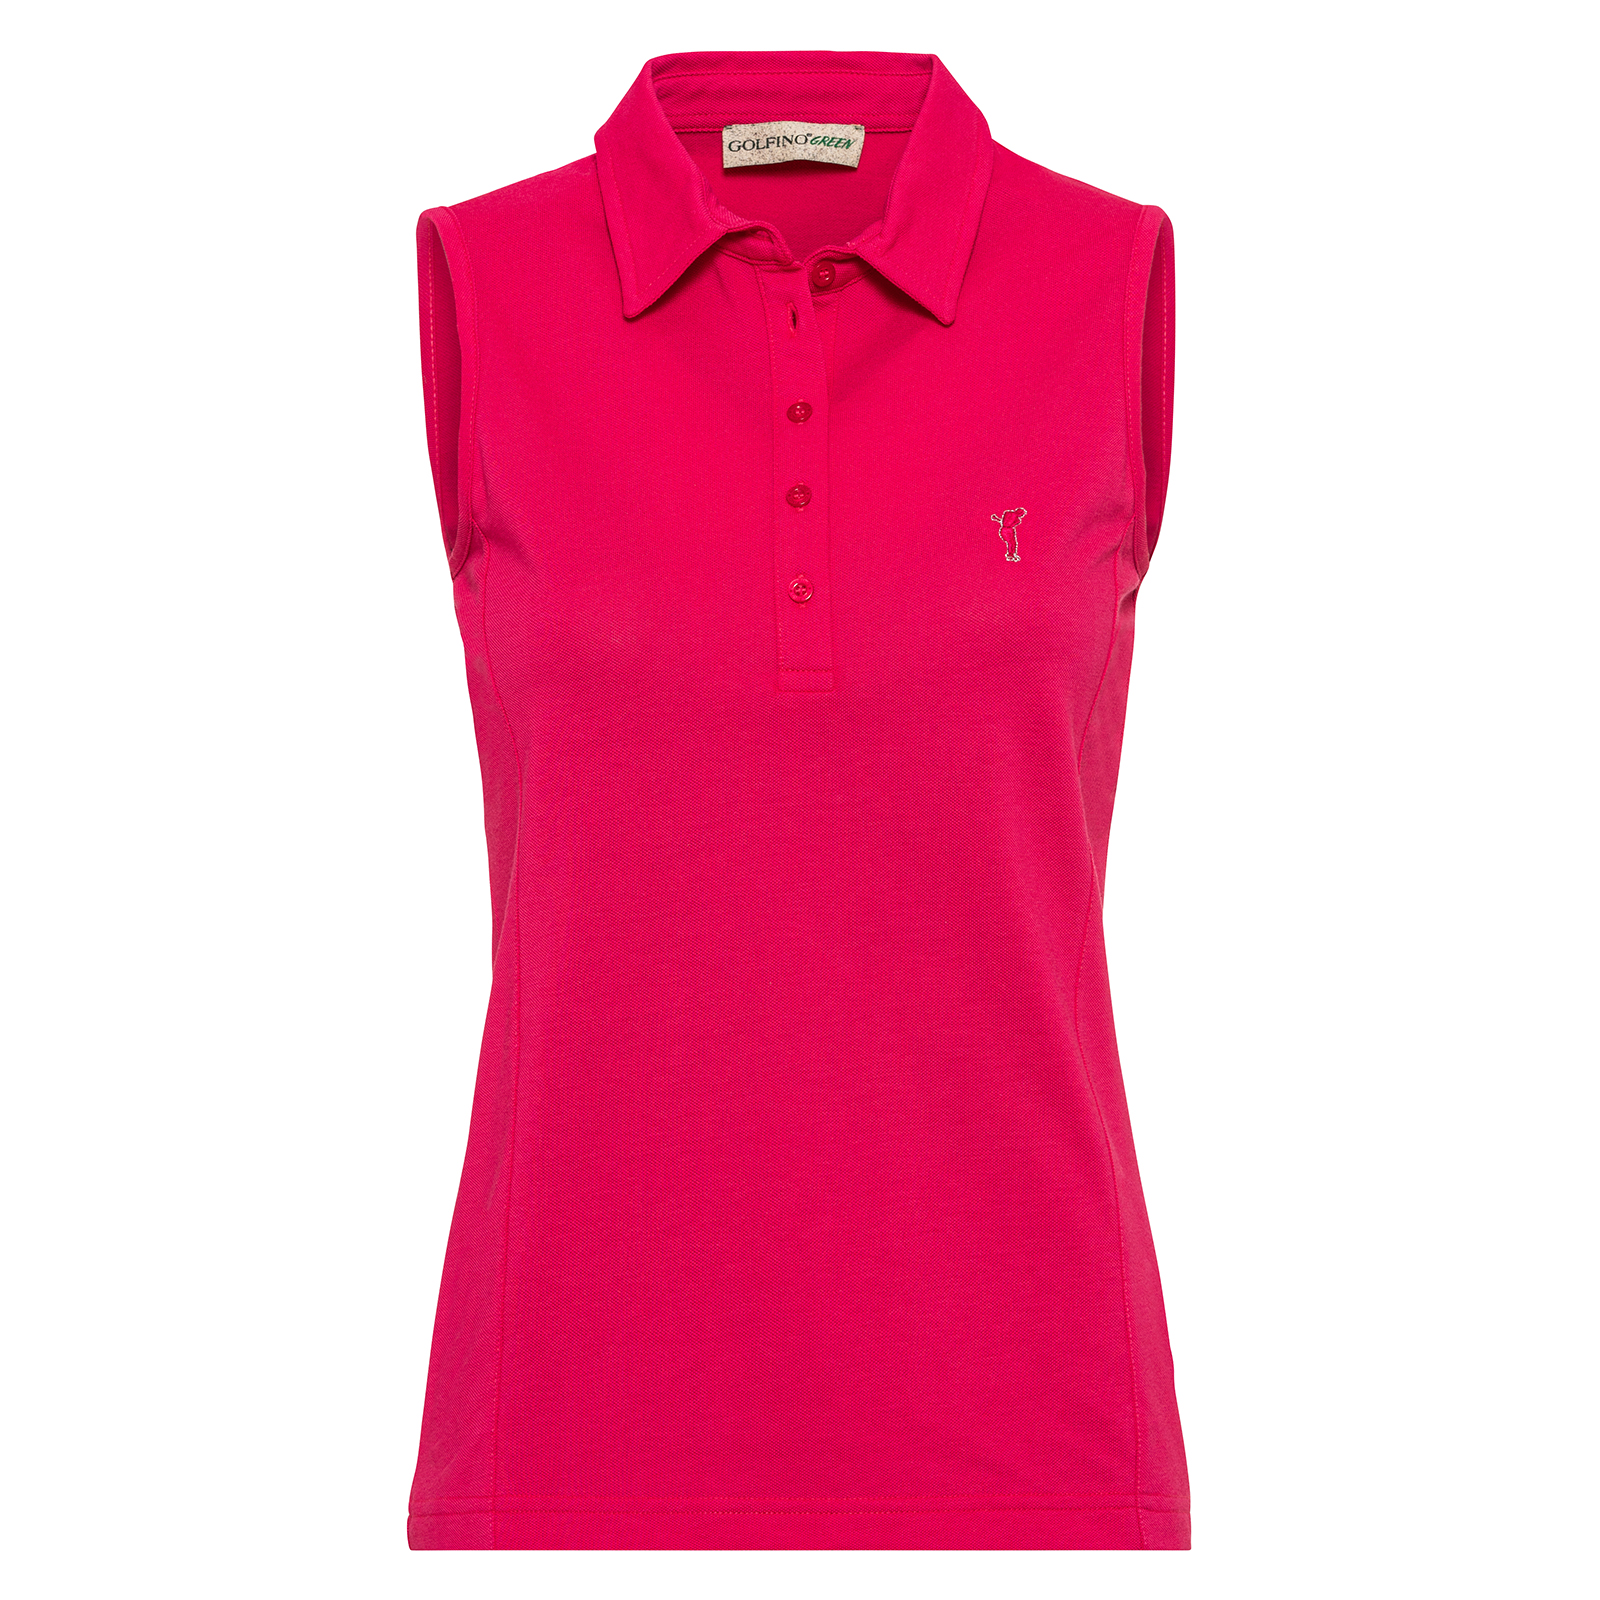 Ladies‘ sleeveless golf polo made of sustainably produced fabric